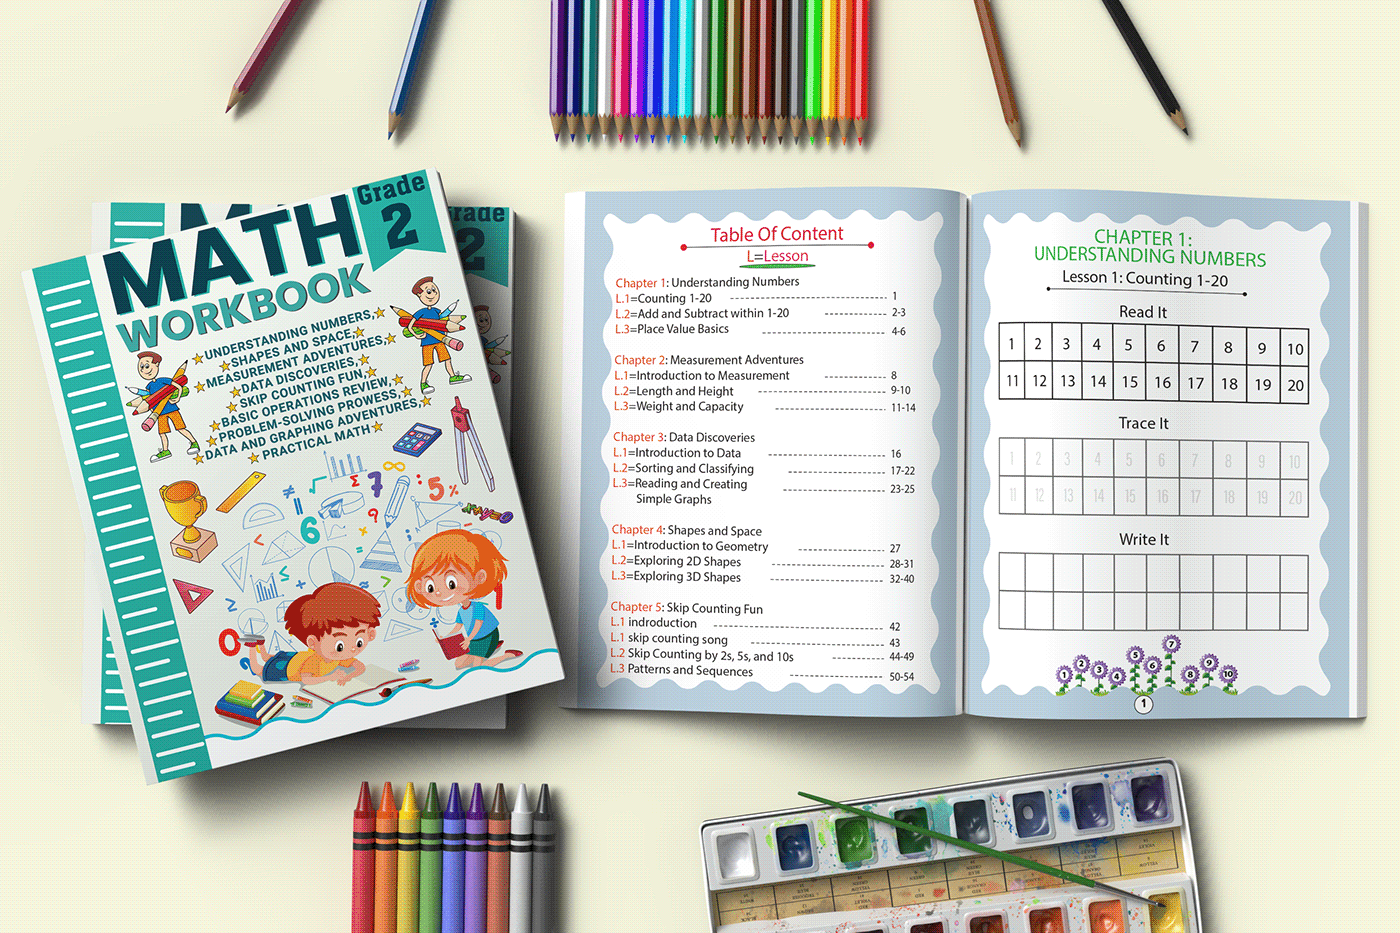 This is a math work book that will help a child learn maths thoroughly